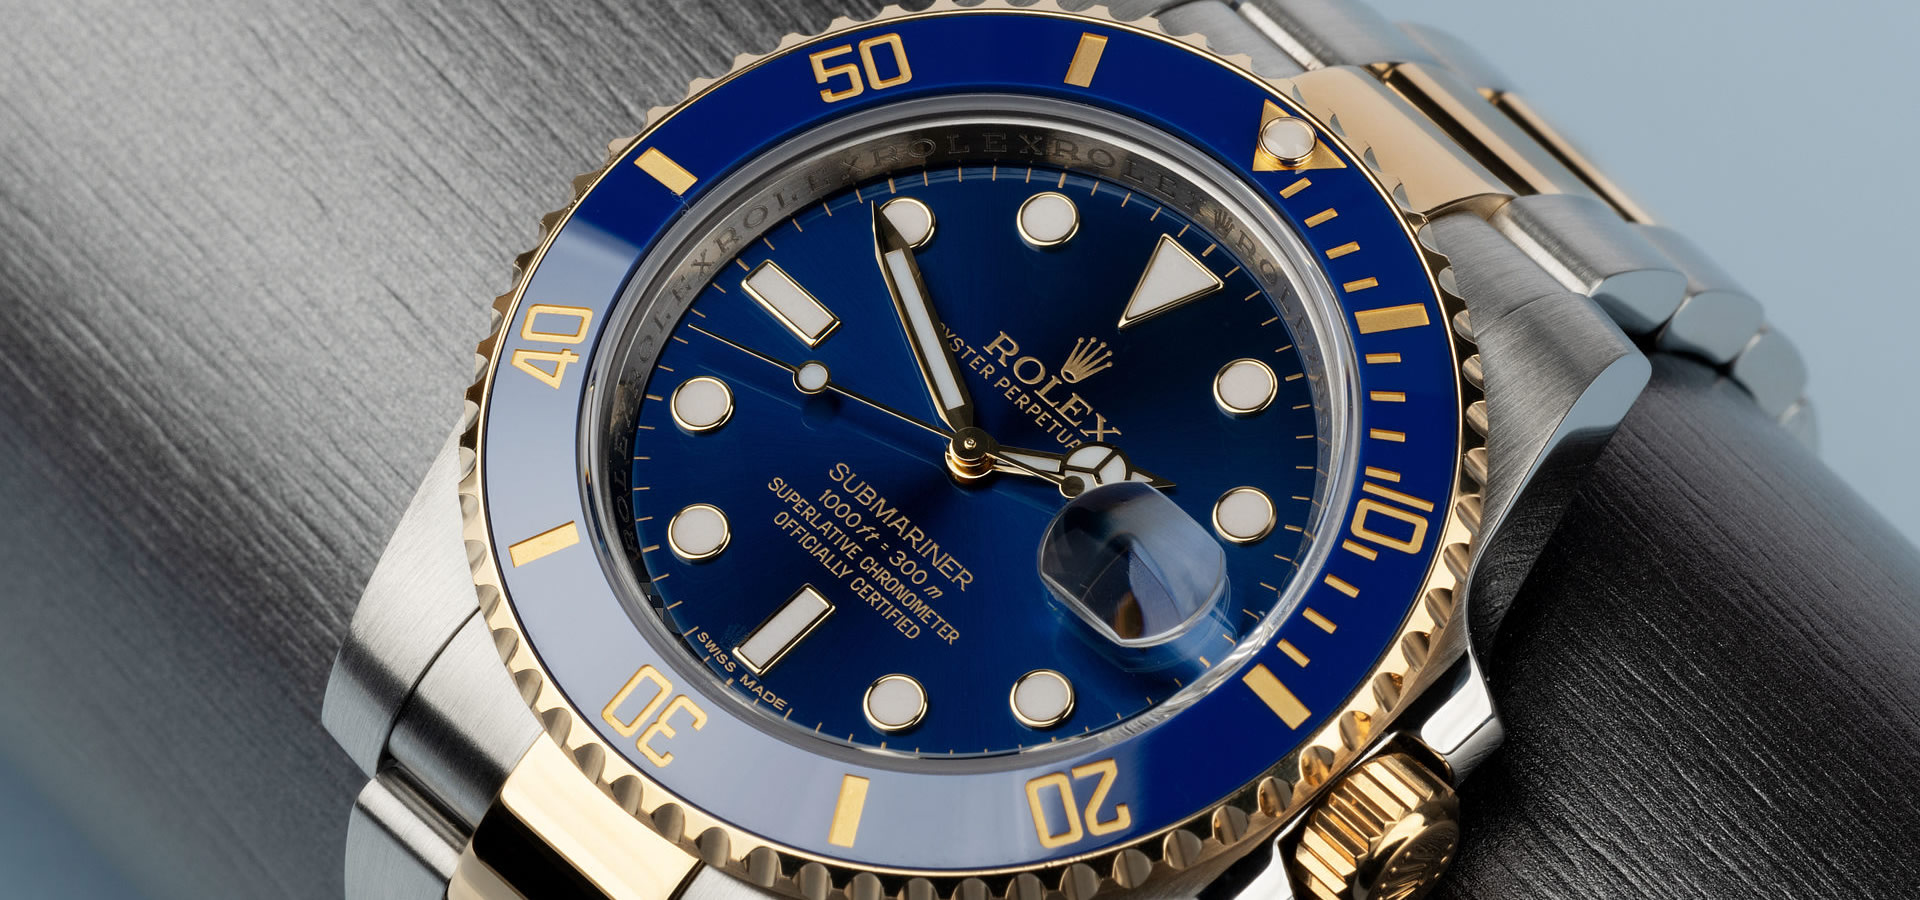 How Often Should I Service My Rolex Watch?